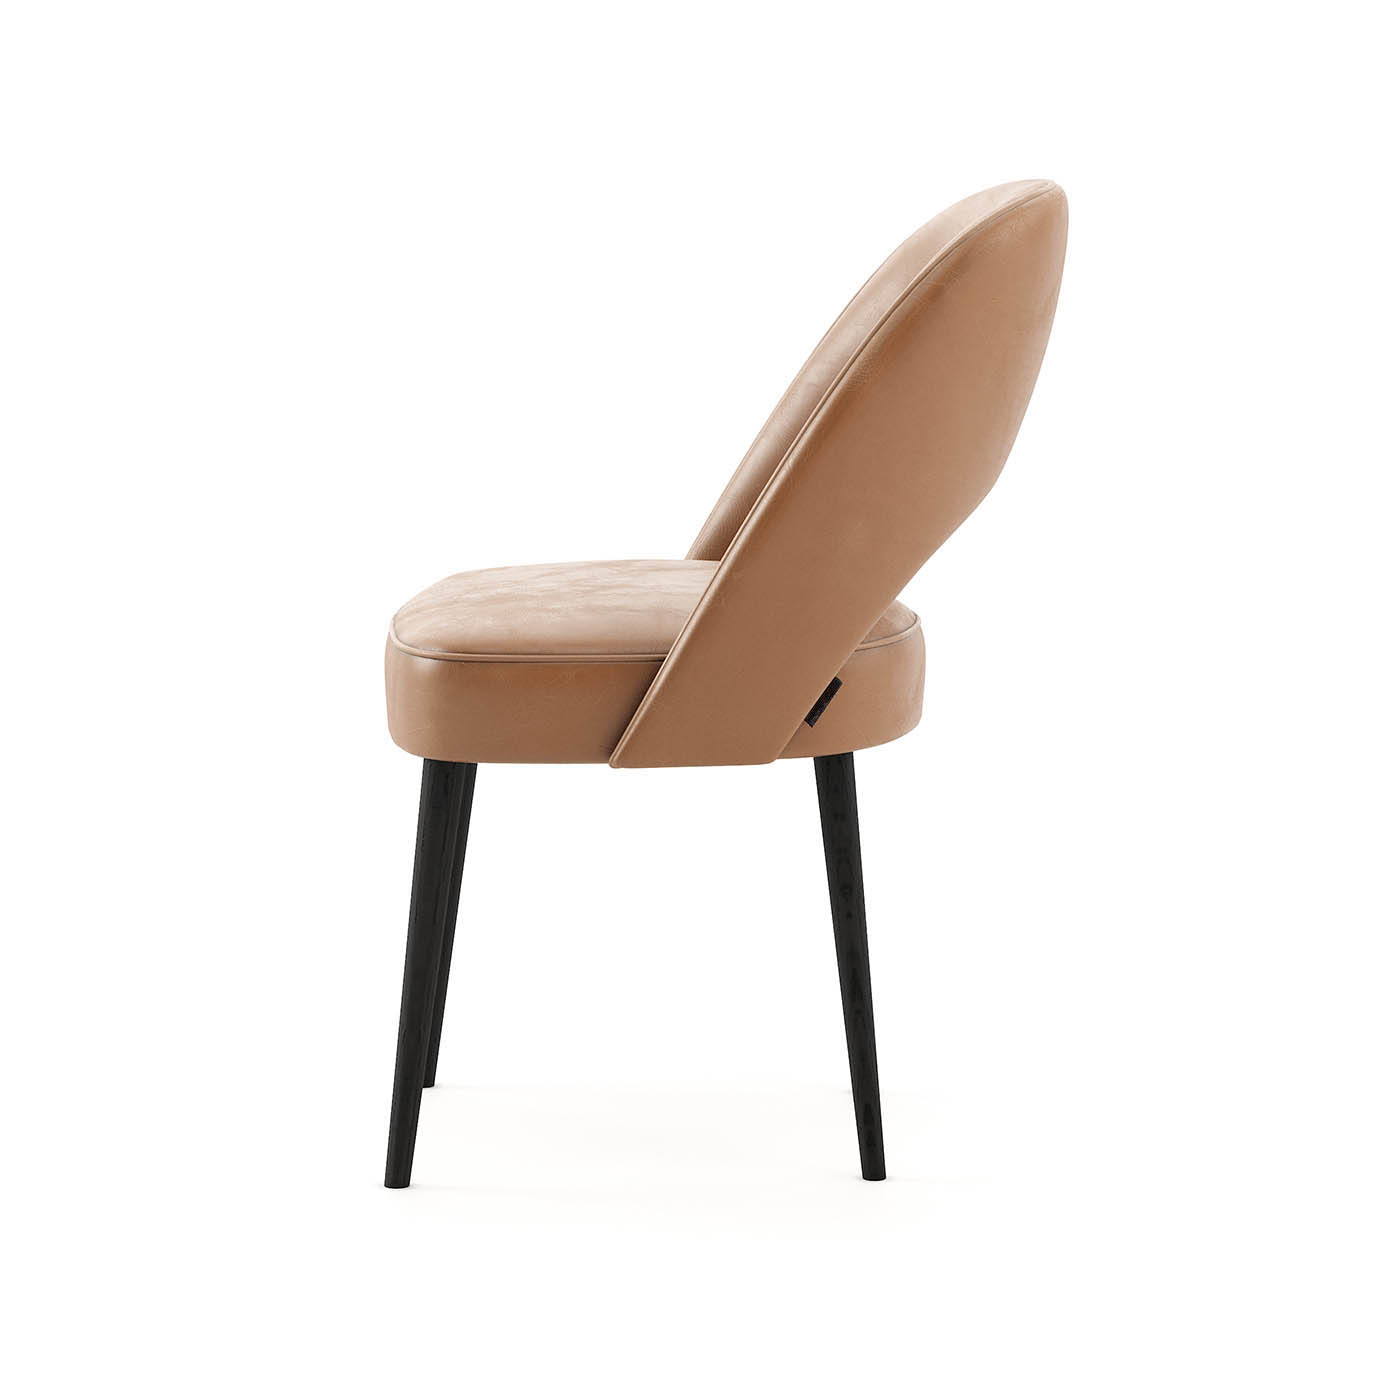 Amour Chair - Amactare